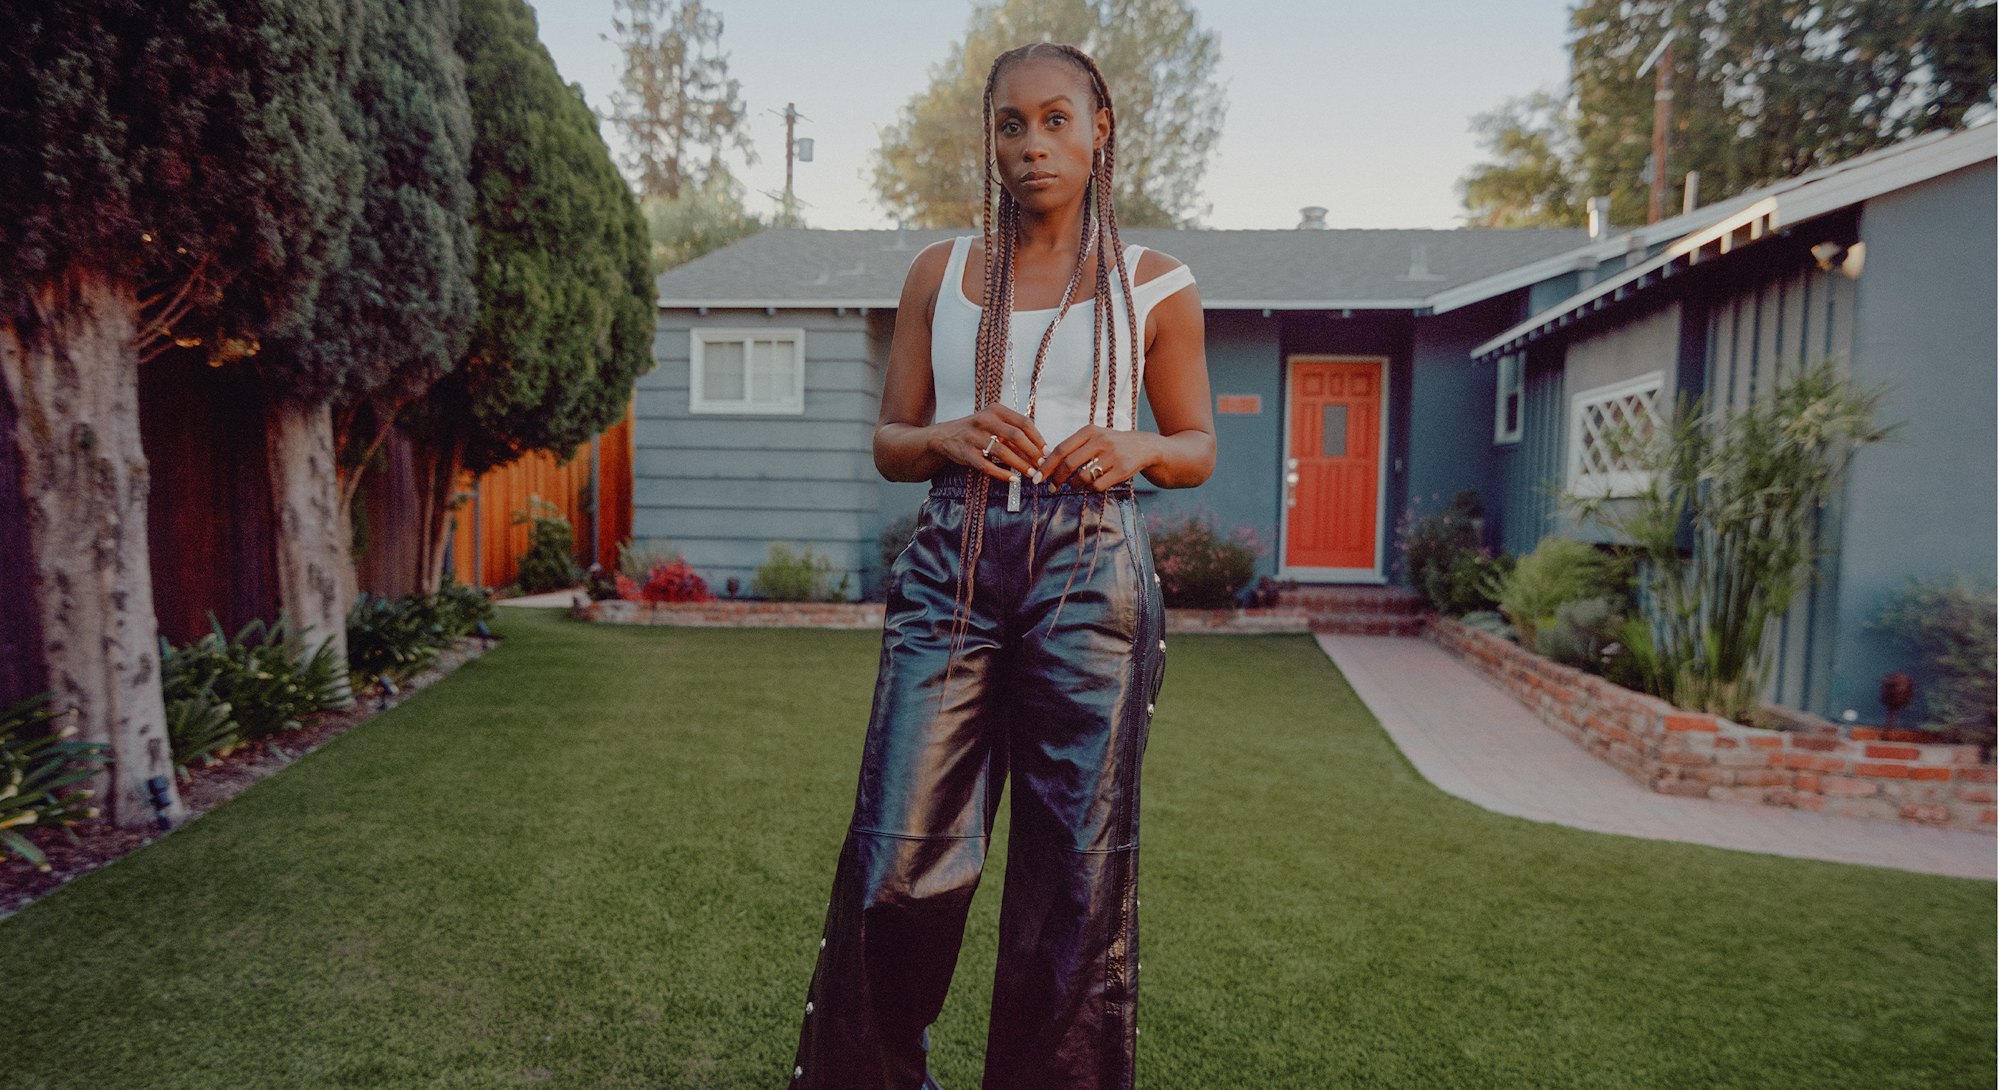 American actress, writer, producer and comedian Issa Rae in a garden